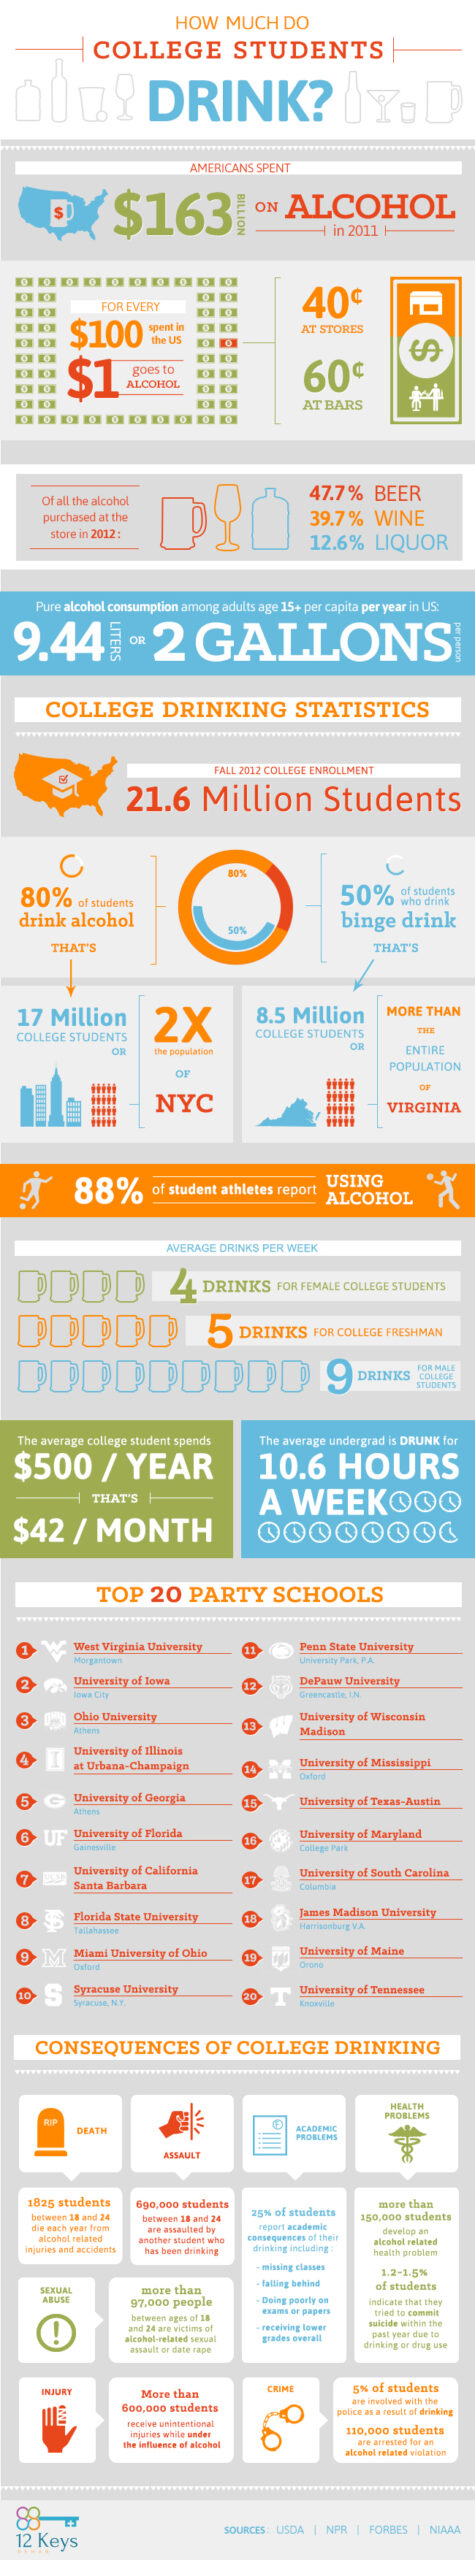 How Much Do College Students Drink?